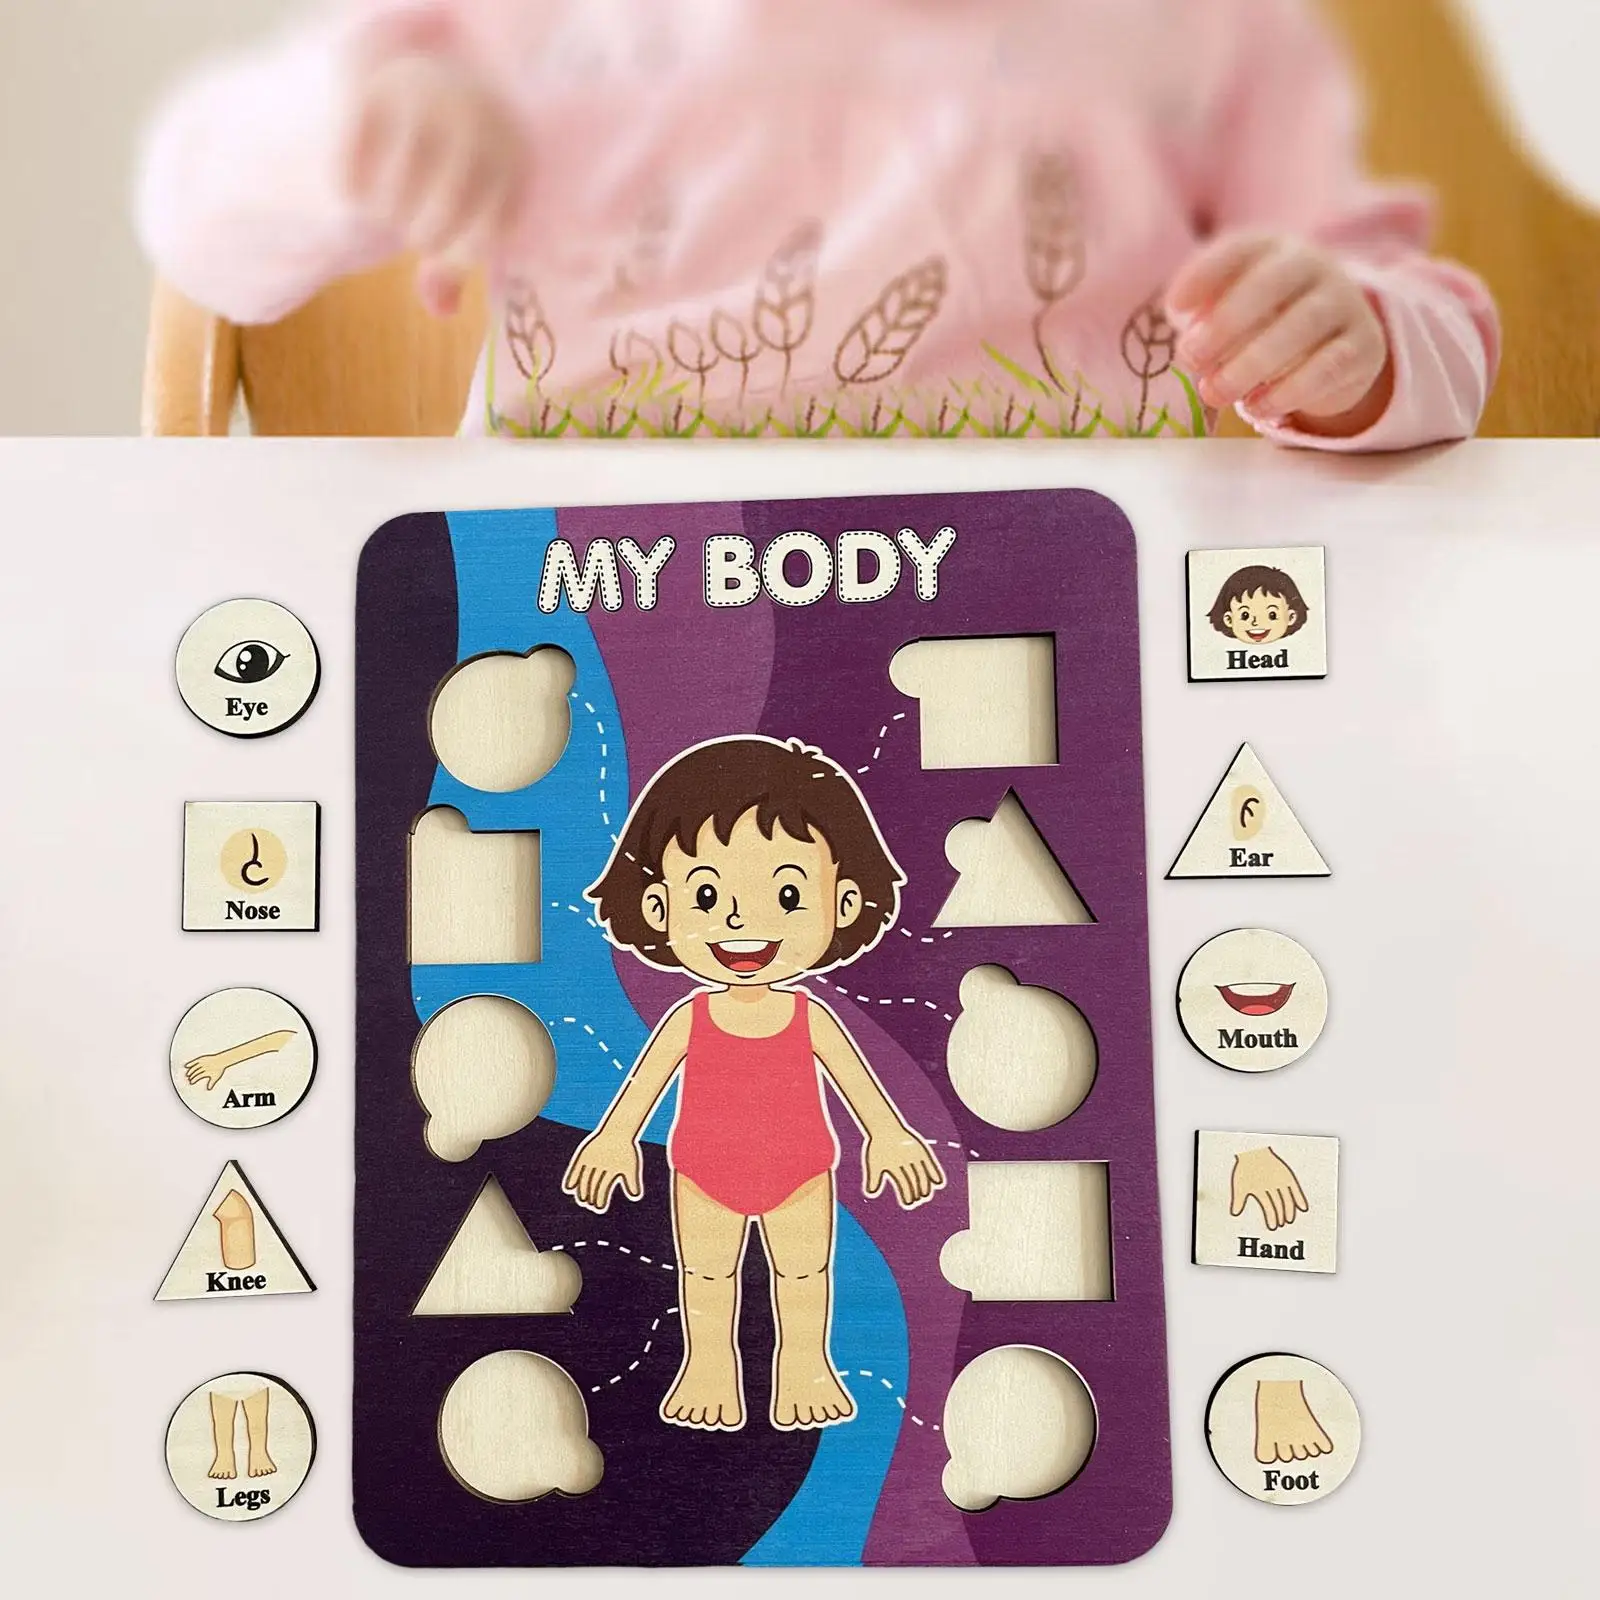 Learning Human Body Parts Boy Girl Play Set Fine Motor Skill Wood Peg Puzzle Game for Kids for Birthday Gift